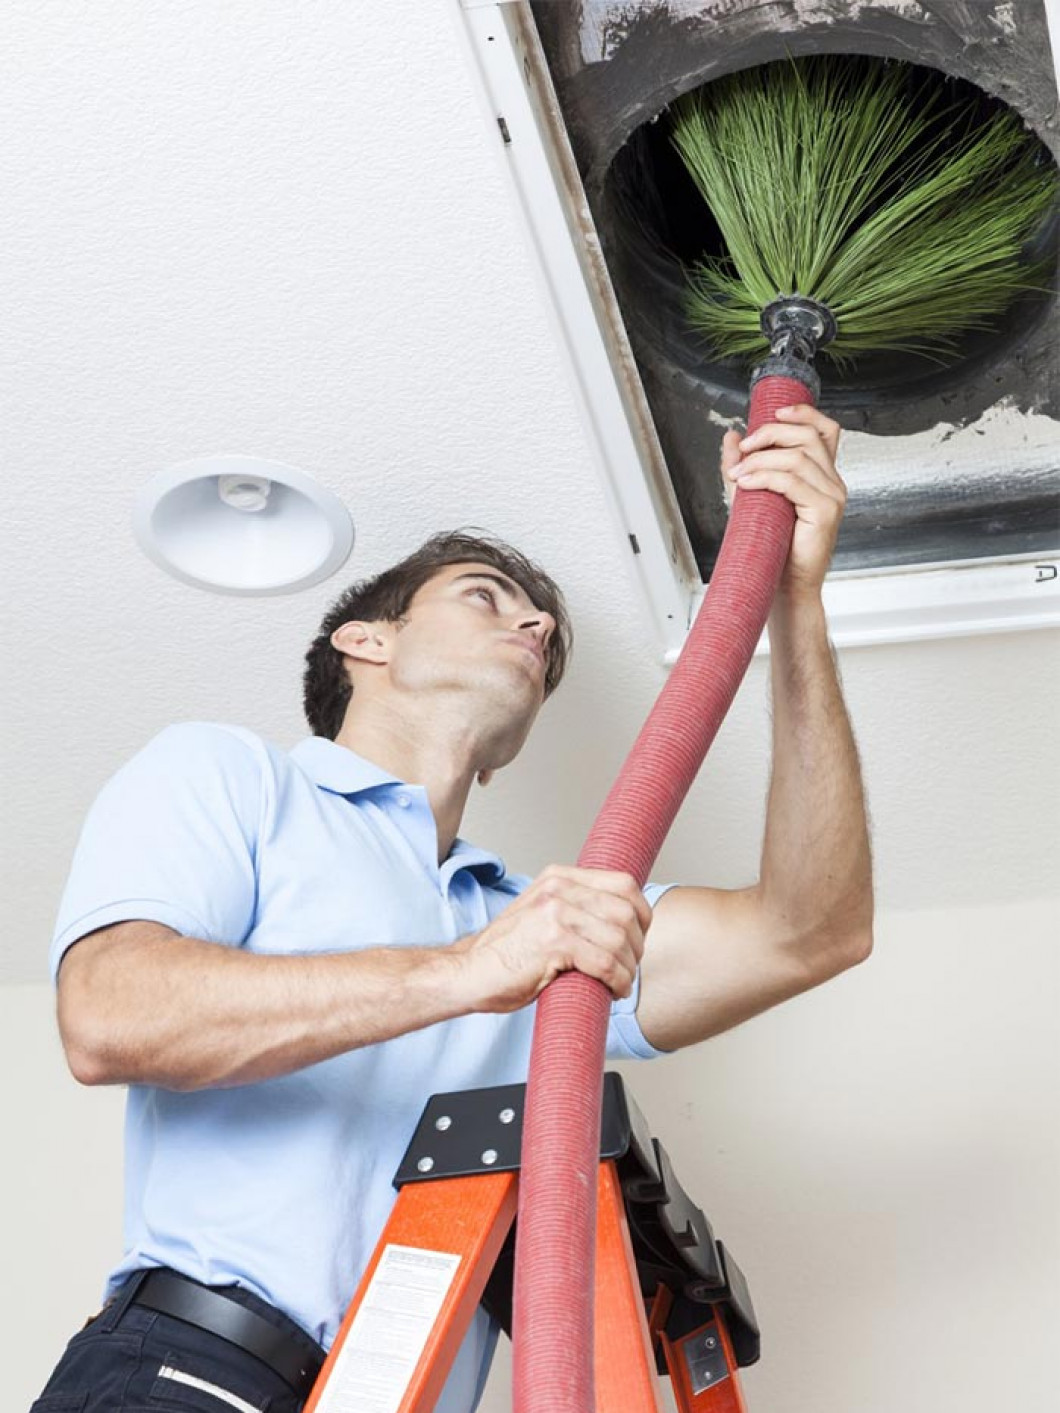 Duct-Cleaning-stock-image.jpg?w=1060&h=1